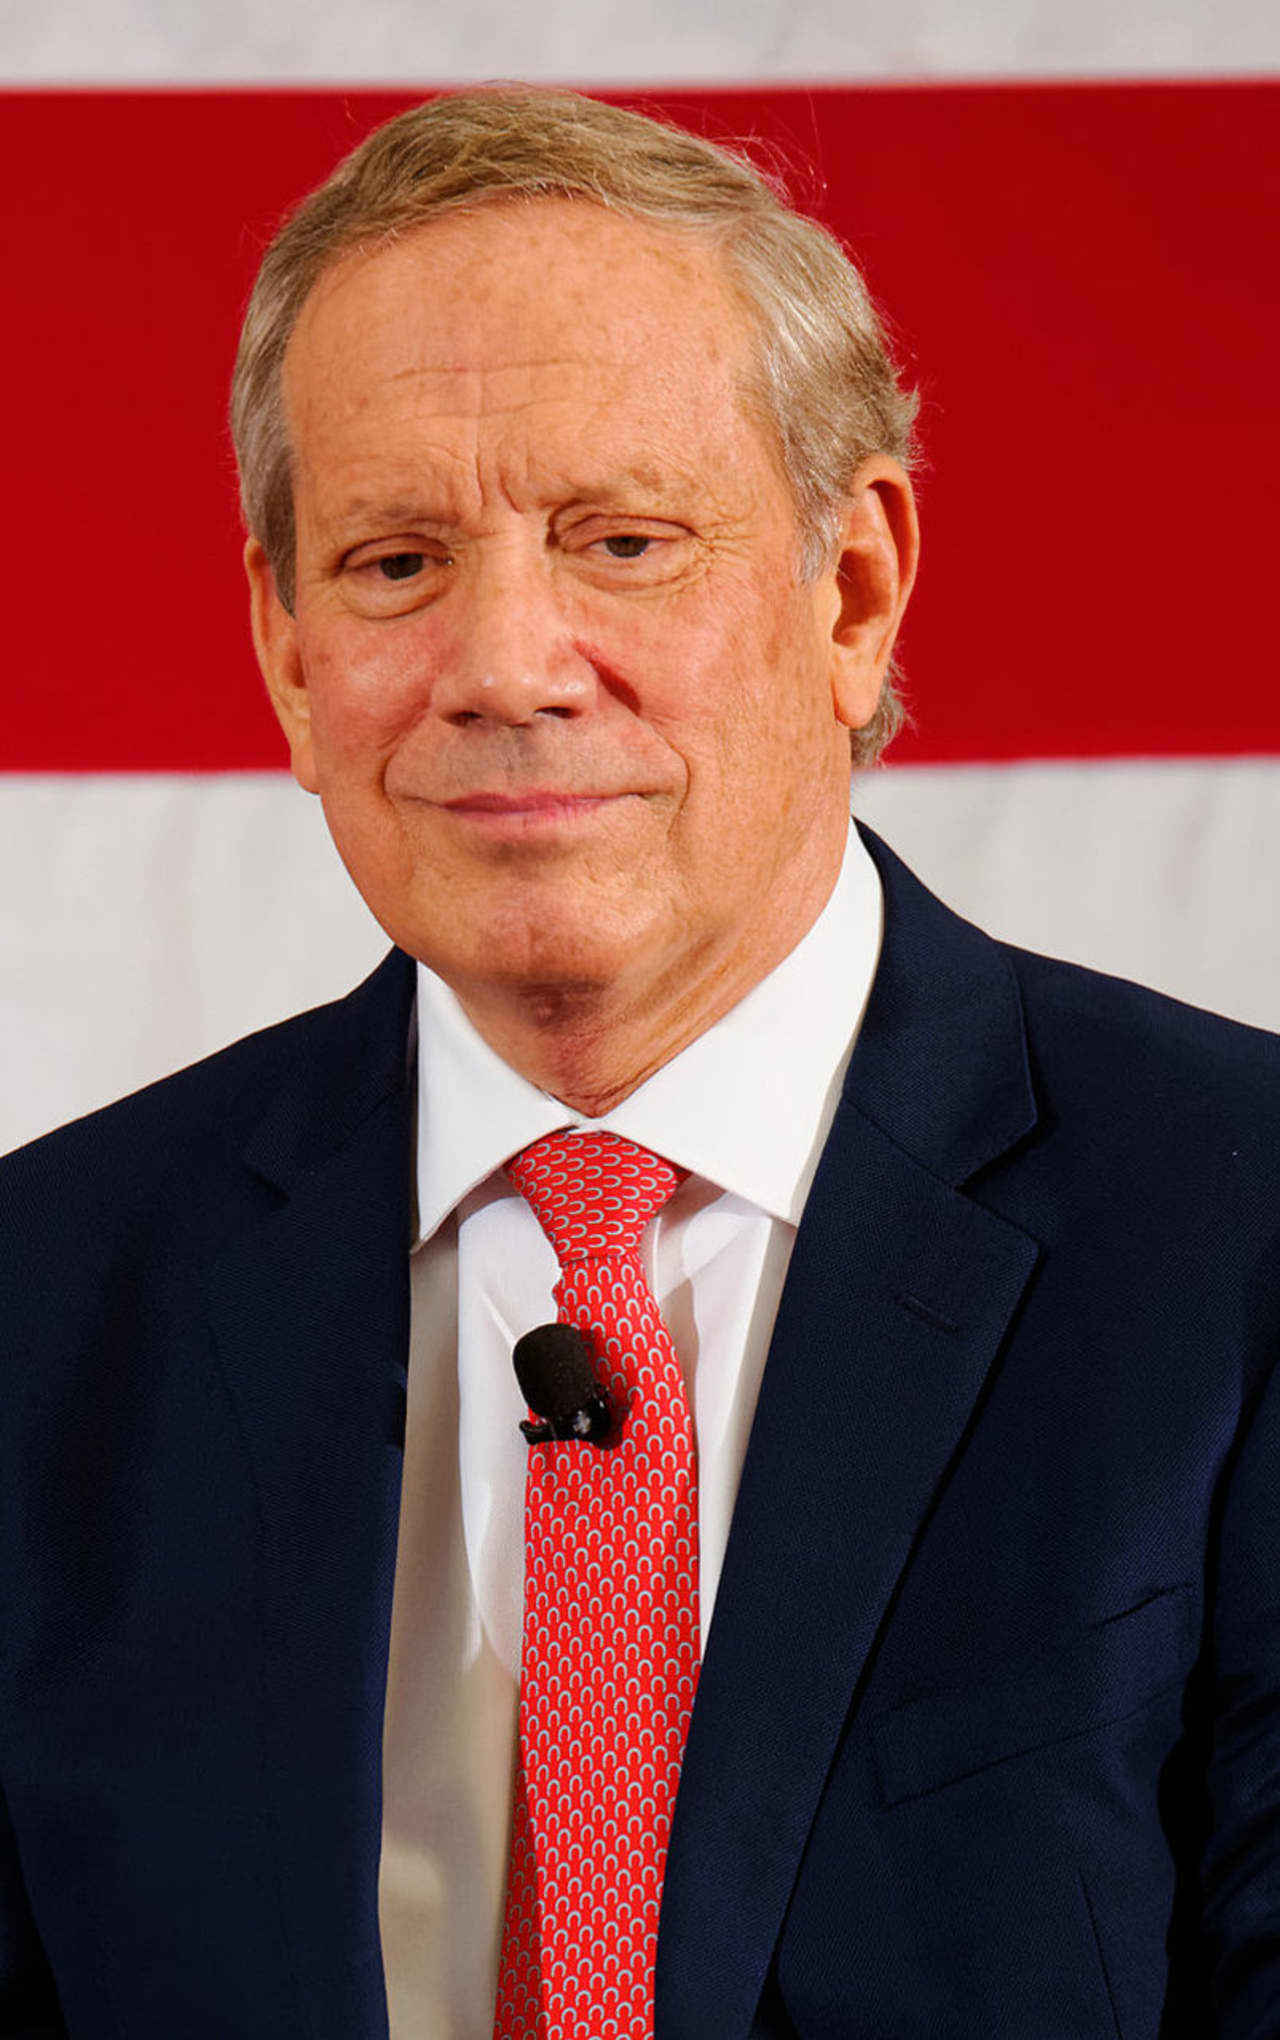 George Pataki's name is being floated as an ambassador to Hungary by an unnamed Hungarian lobbying group, media reports say. The Peekskill native and former governor now lives in Garrison.